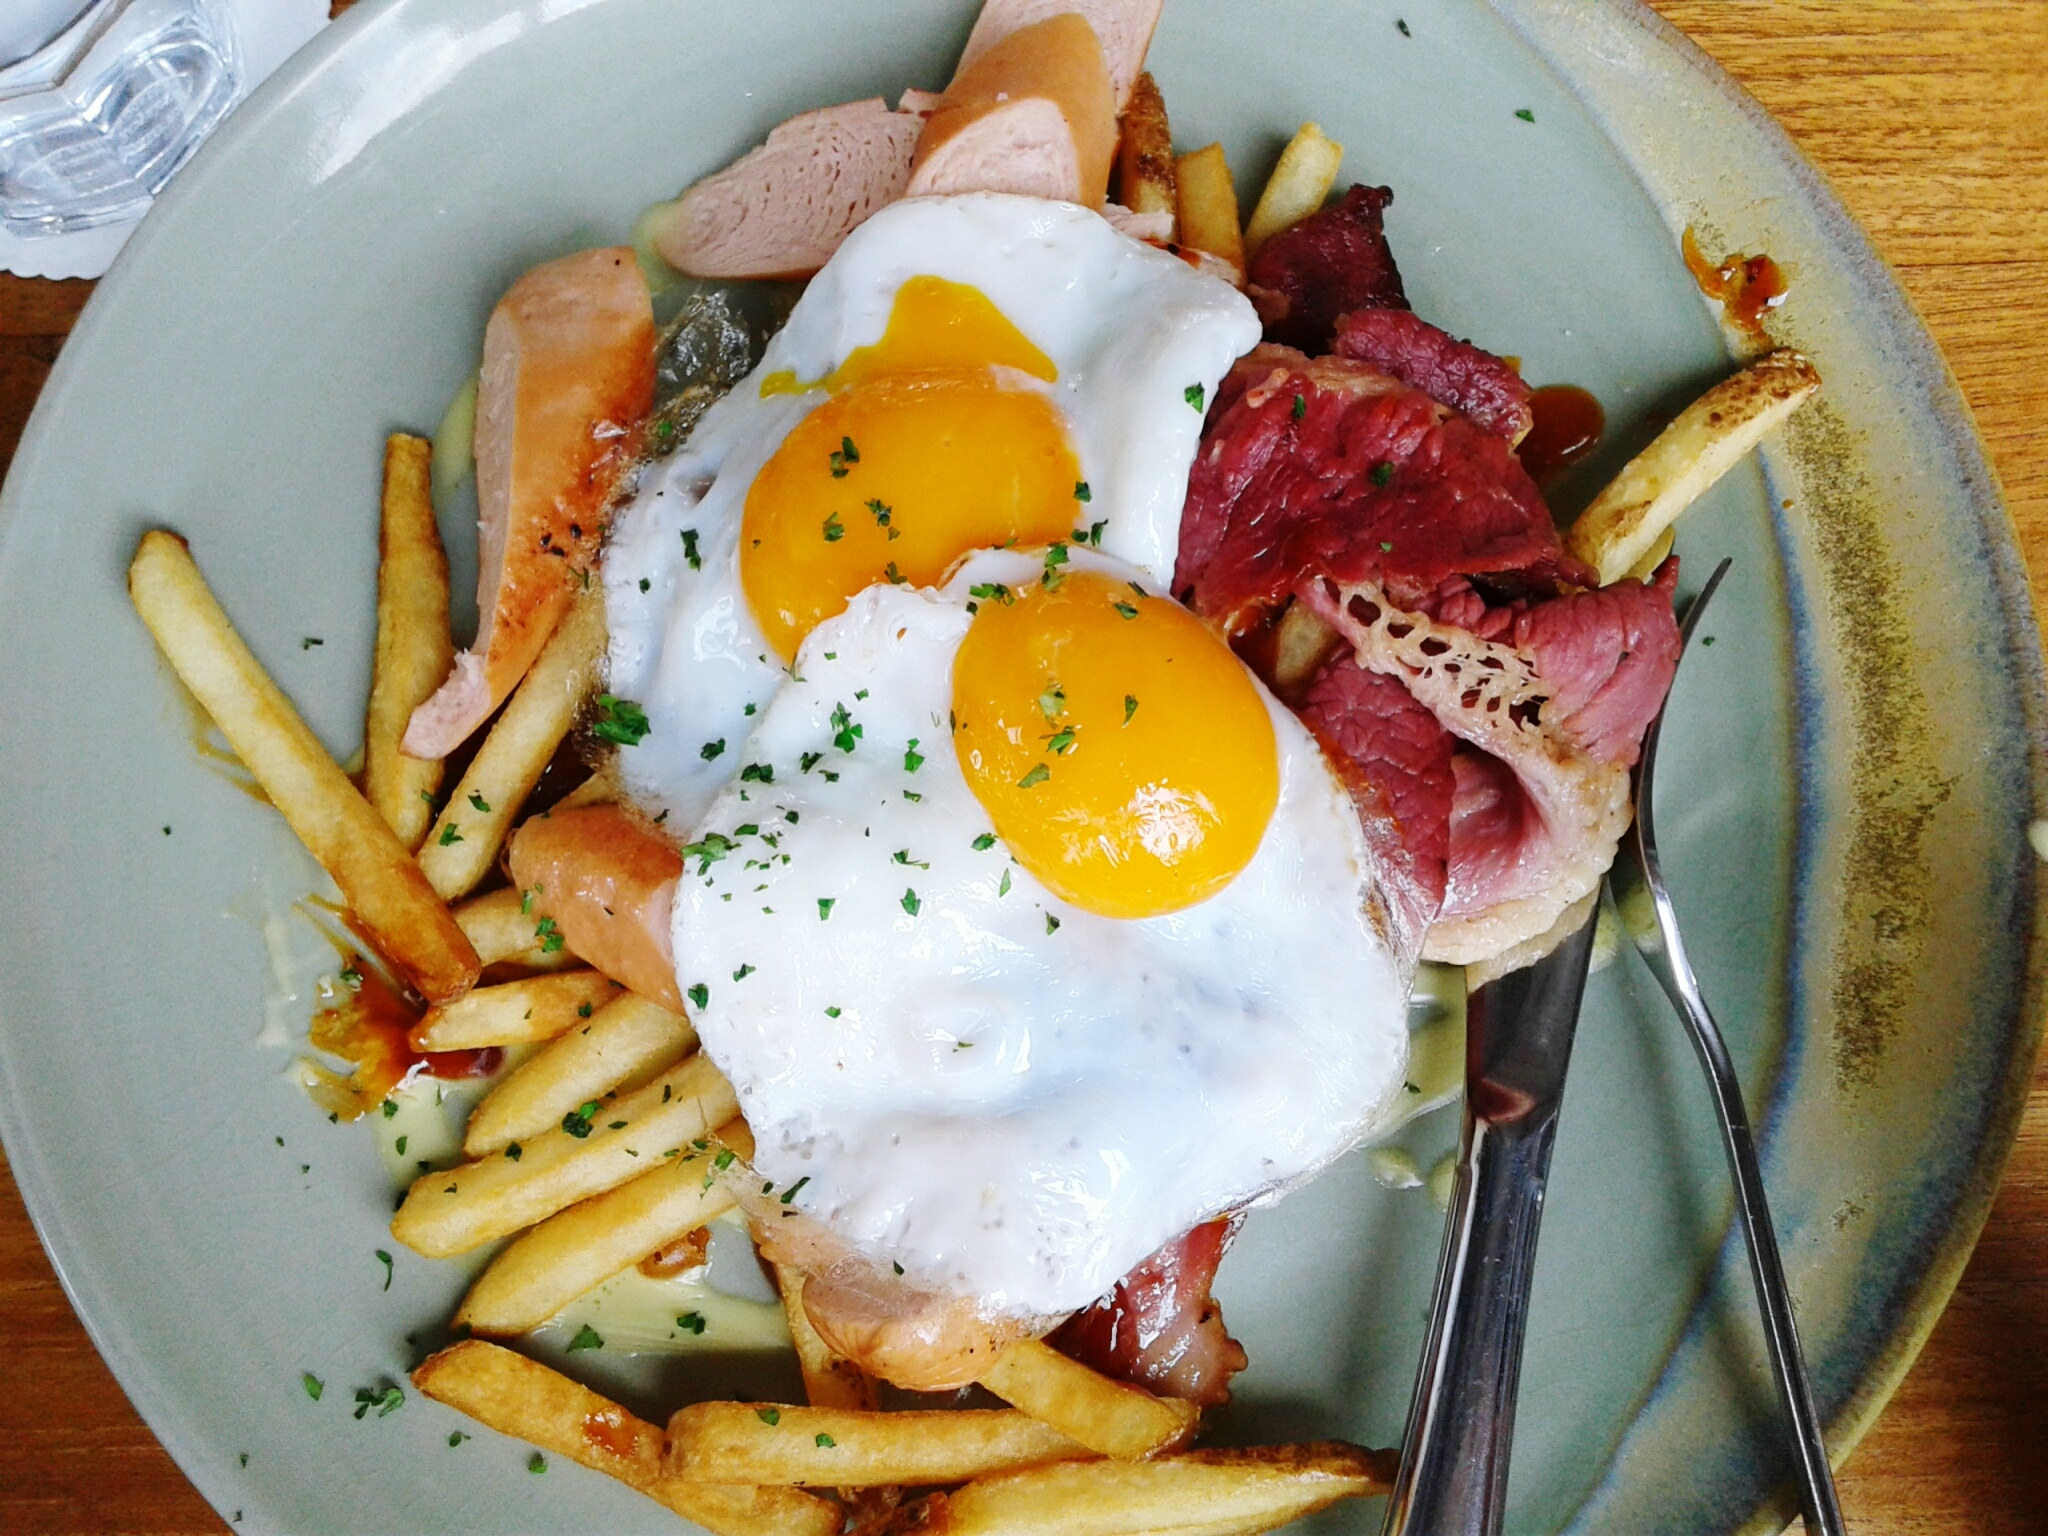 French fries and eggs.